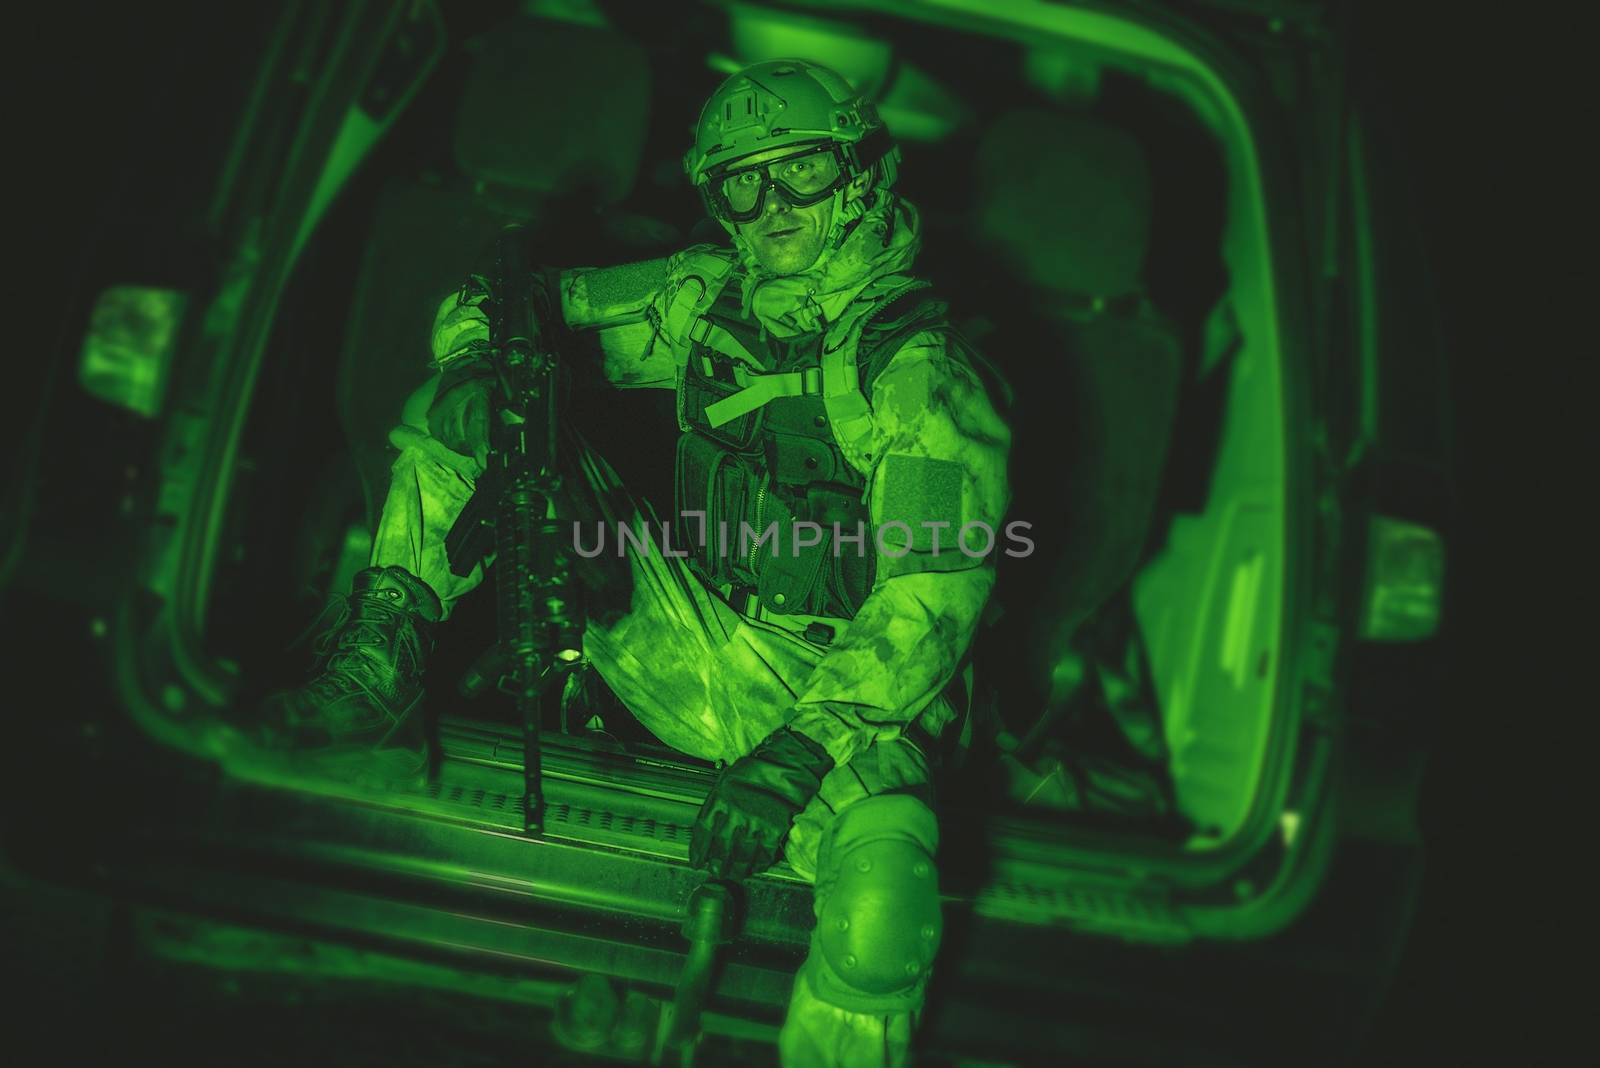 Soldier in Van Night Vision by welcomia